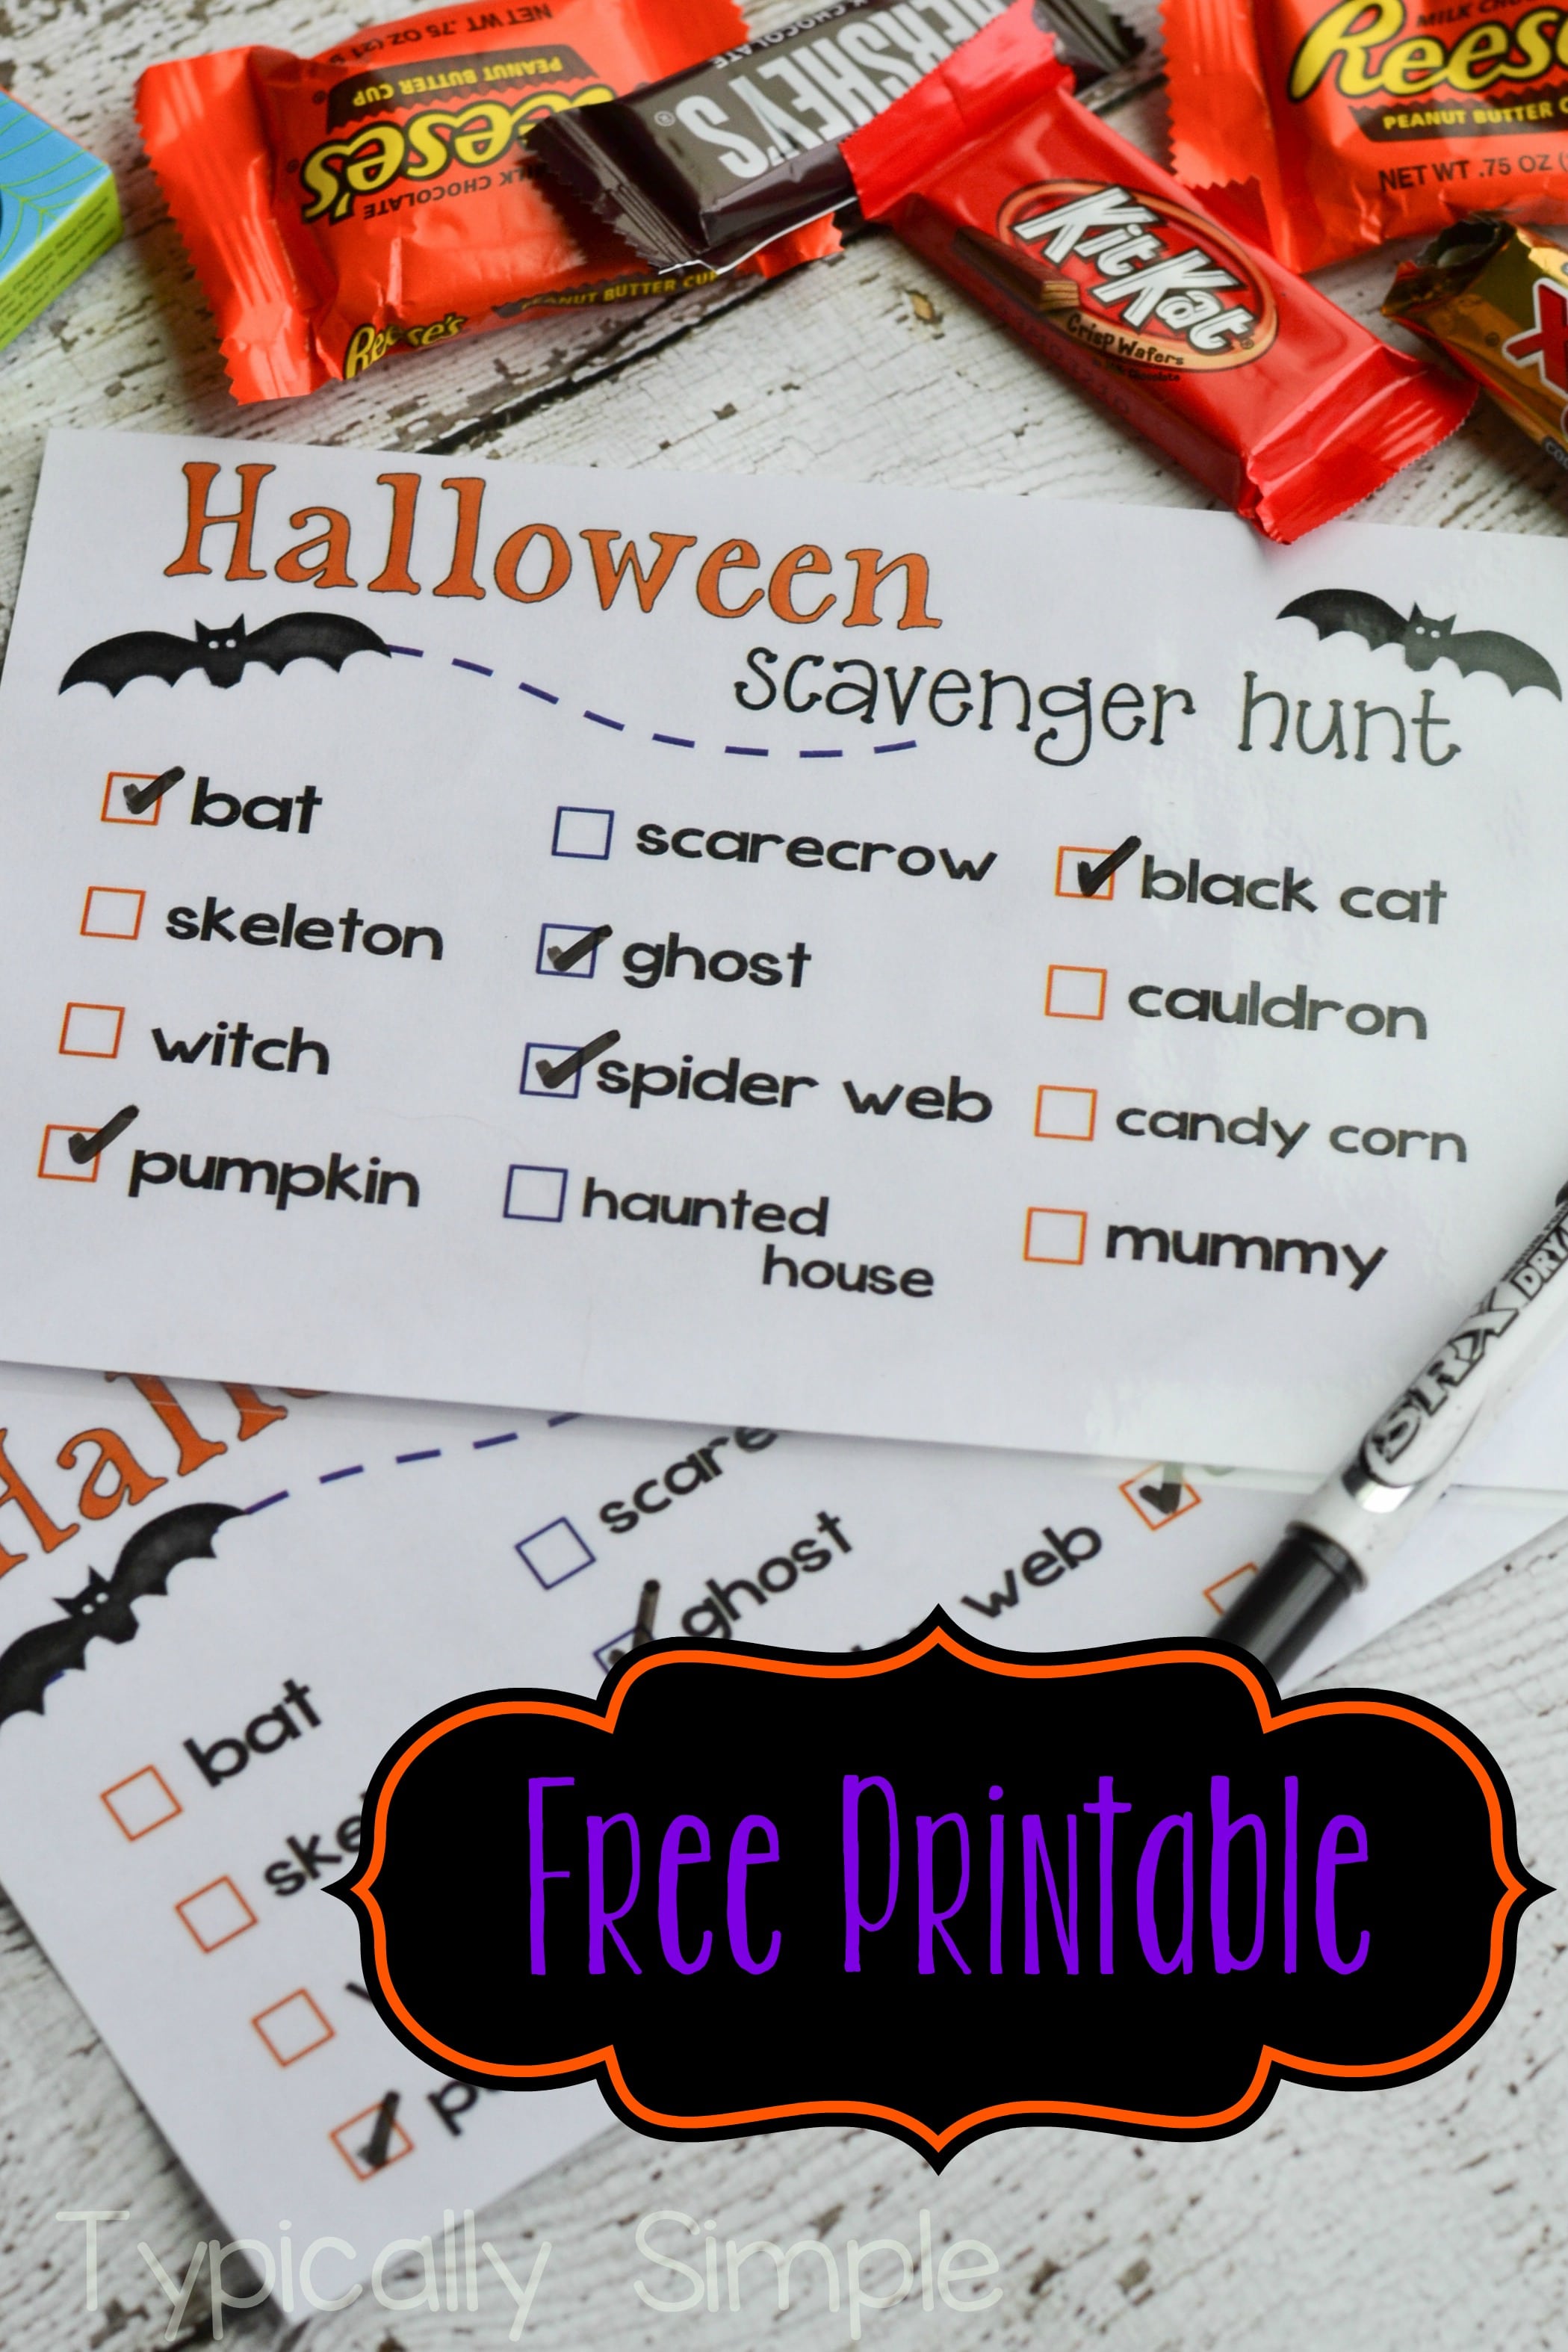 halloween-scavenger-hunt-free-printable-typically-simple